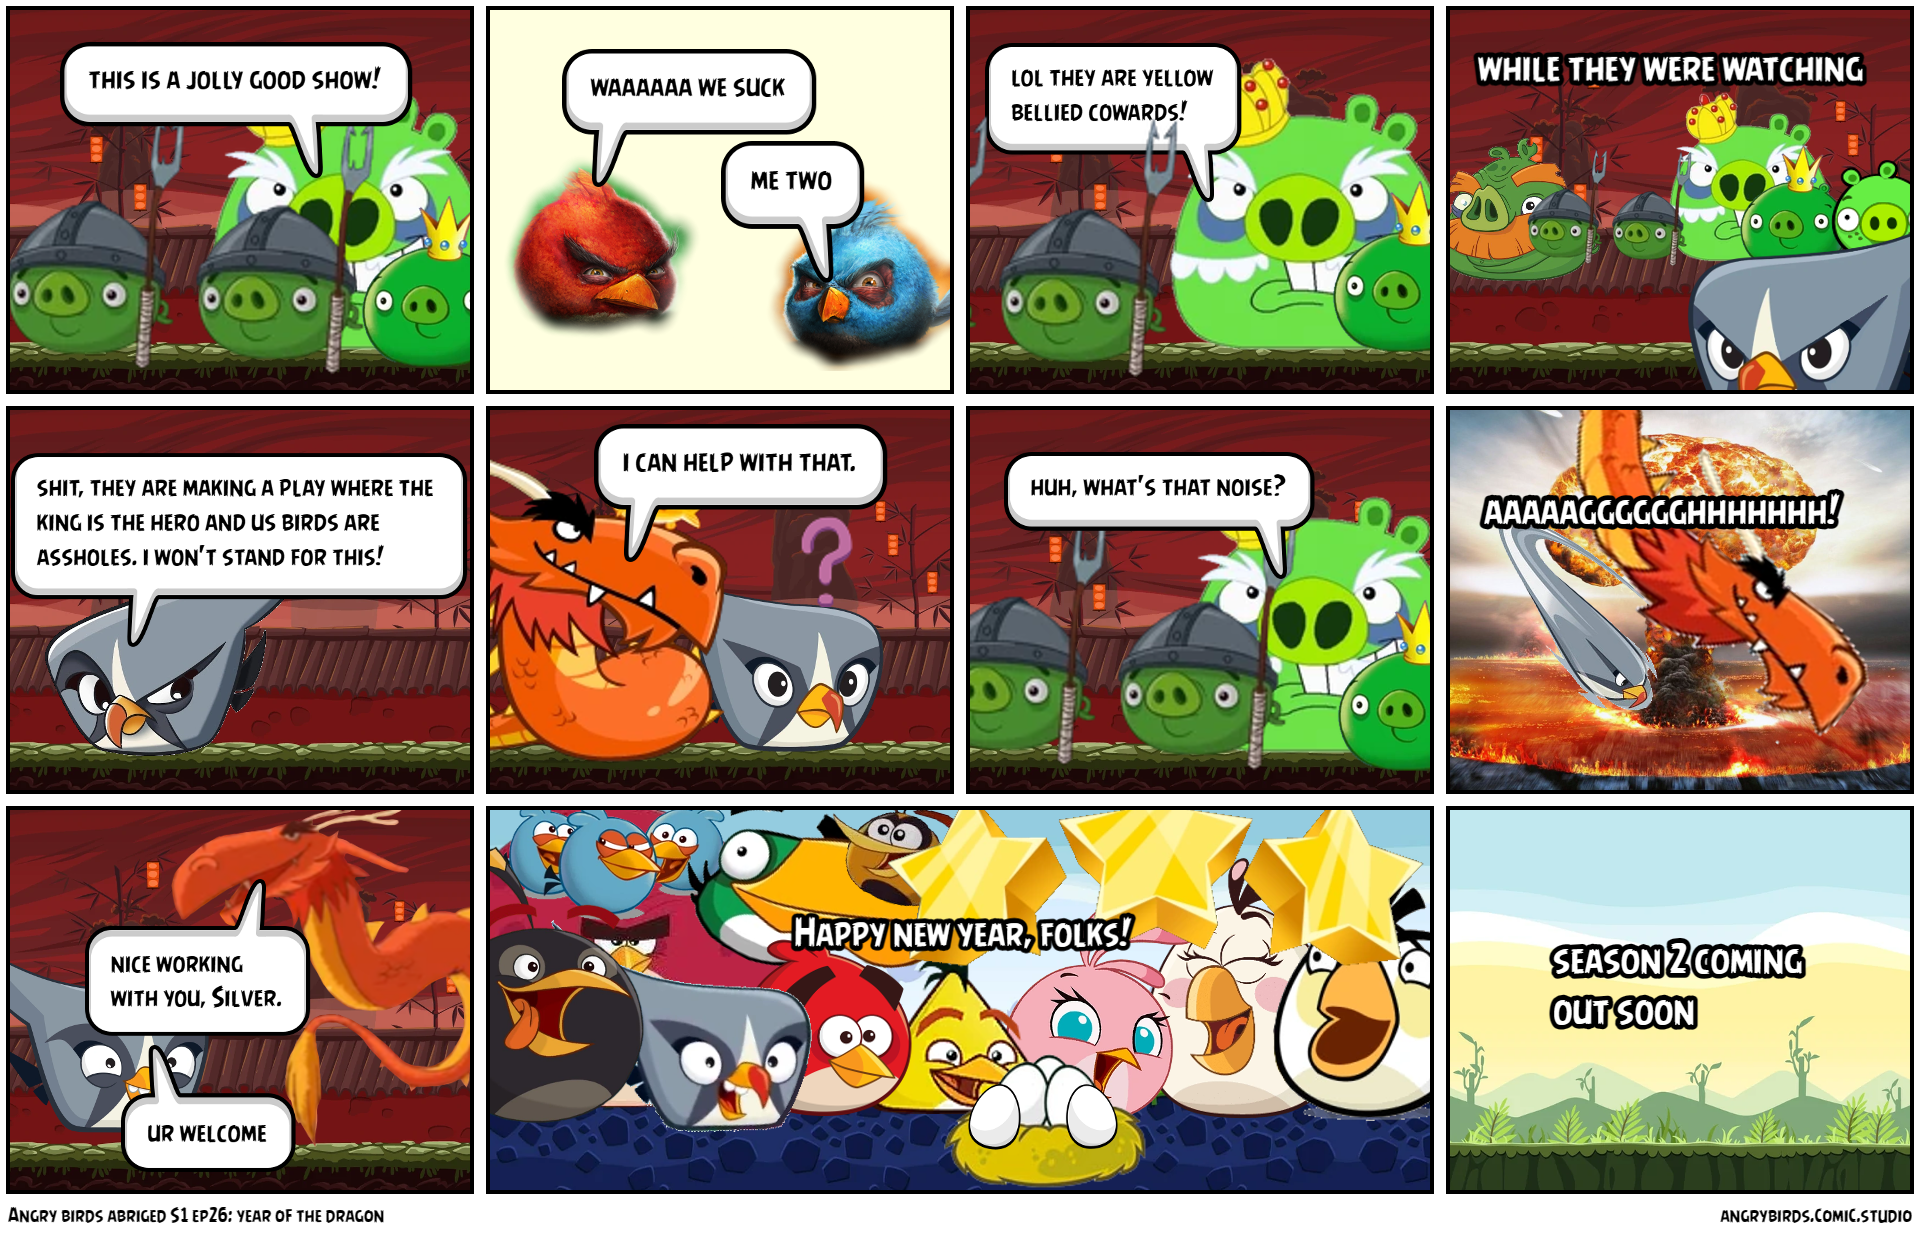 Angry birds abriged S1 ep26: year of the dragon